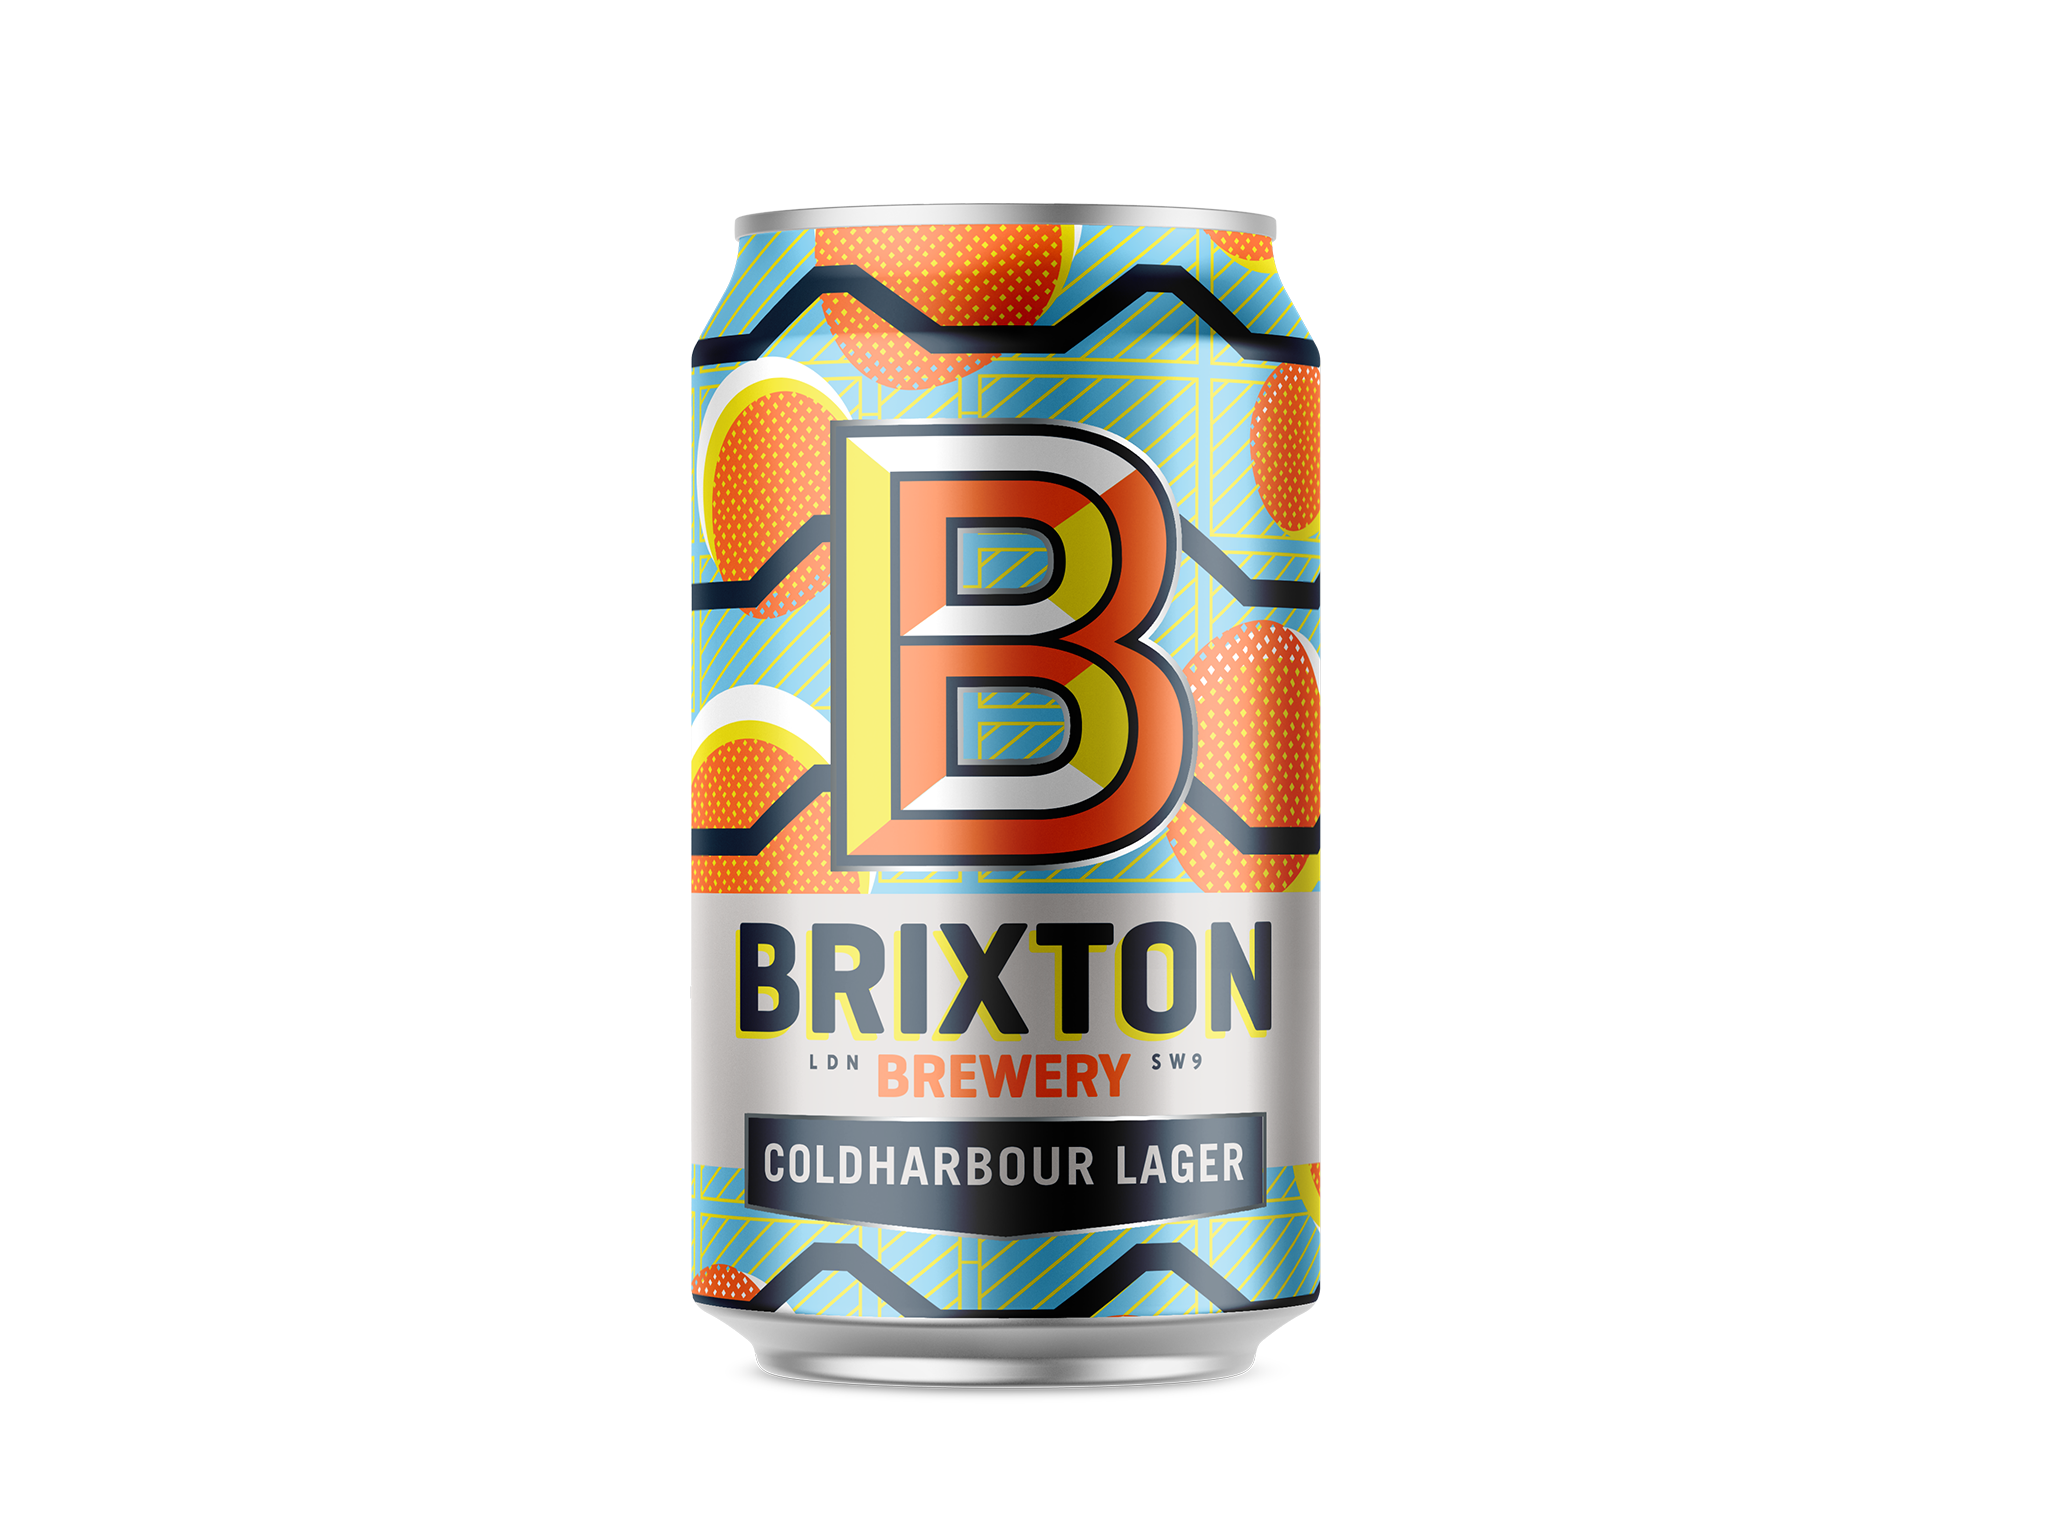 Best British lagers 2022: Pilsner, helles and more